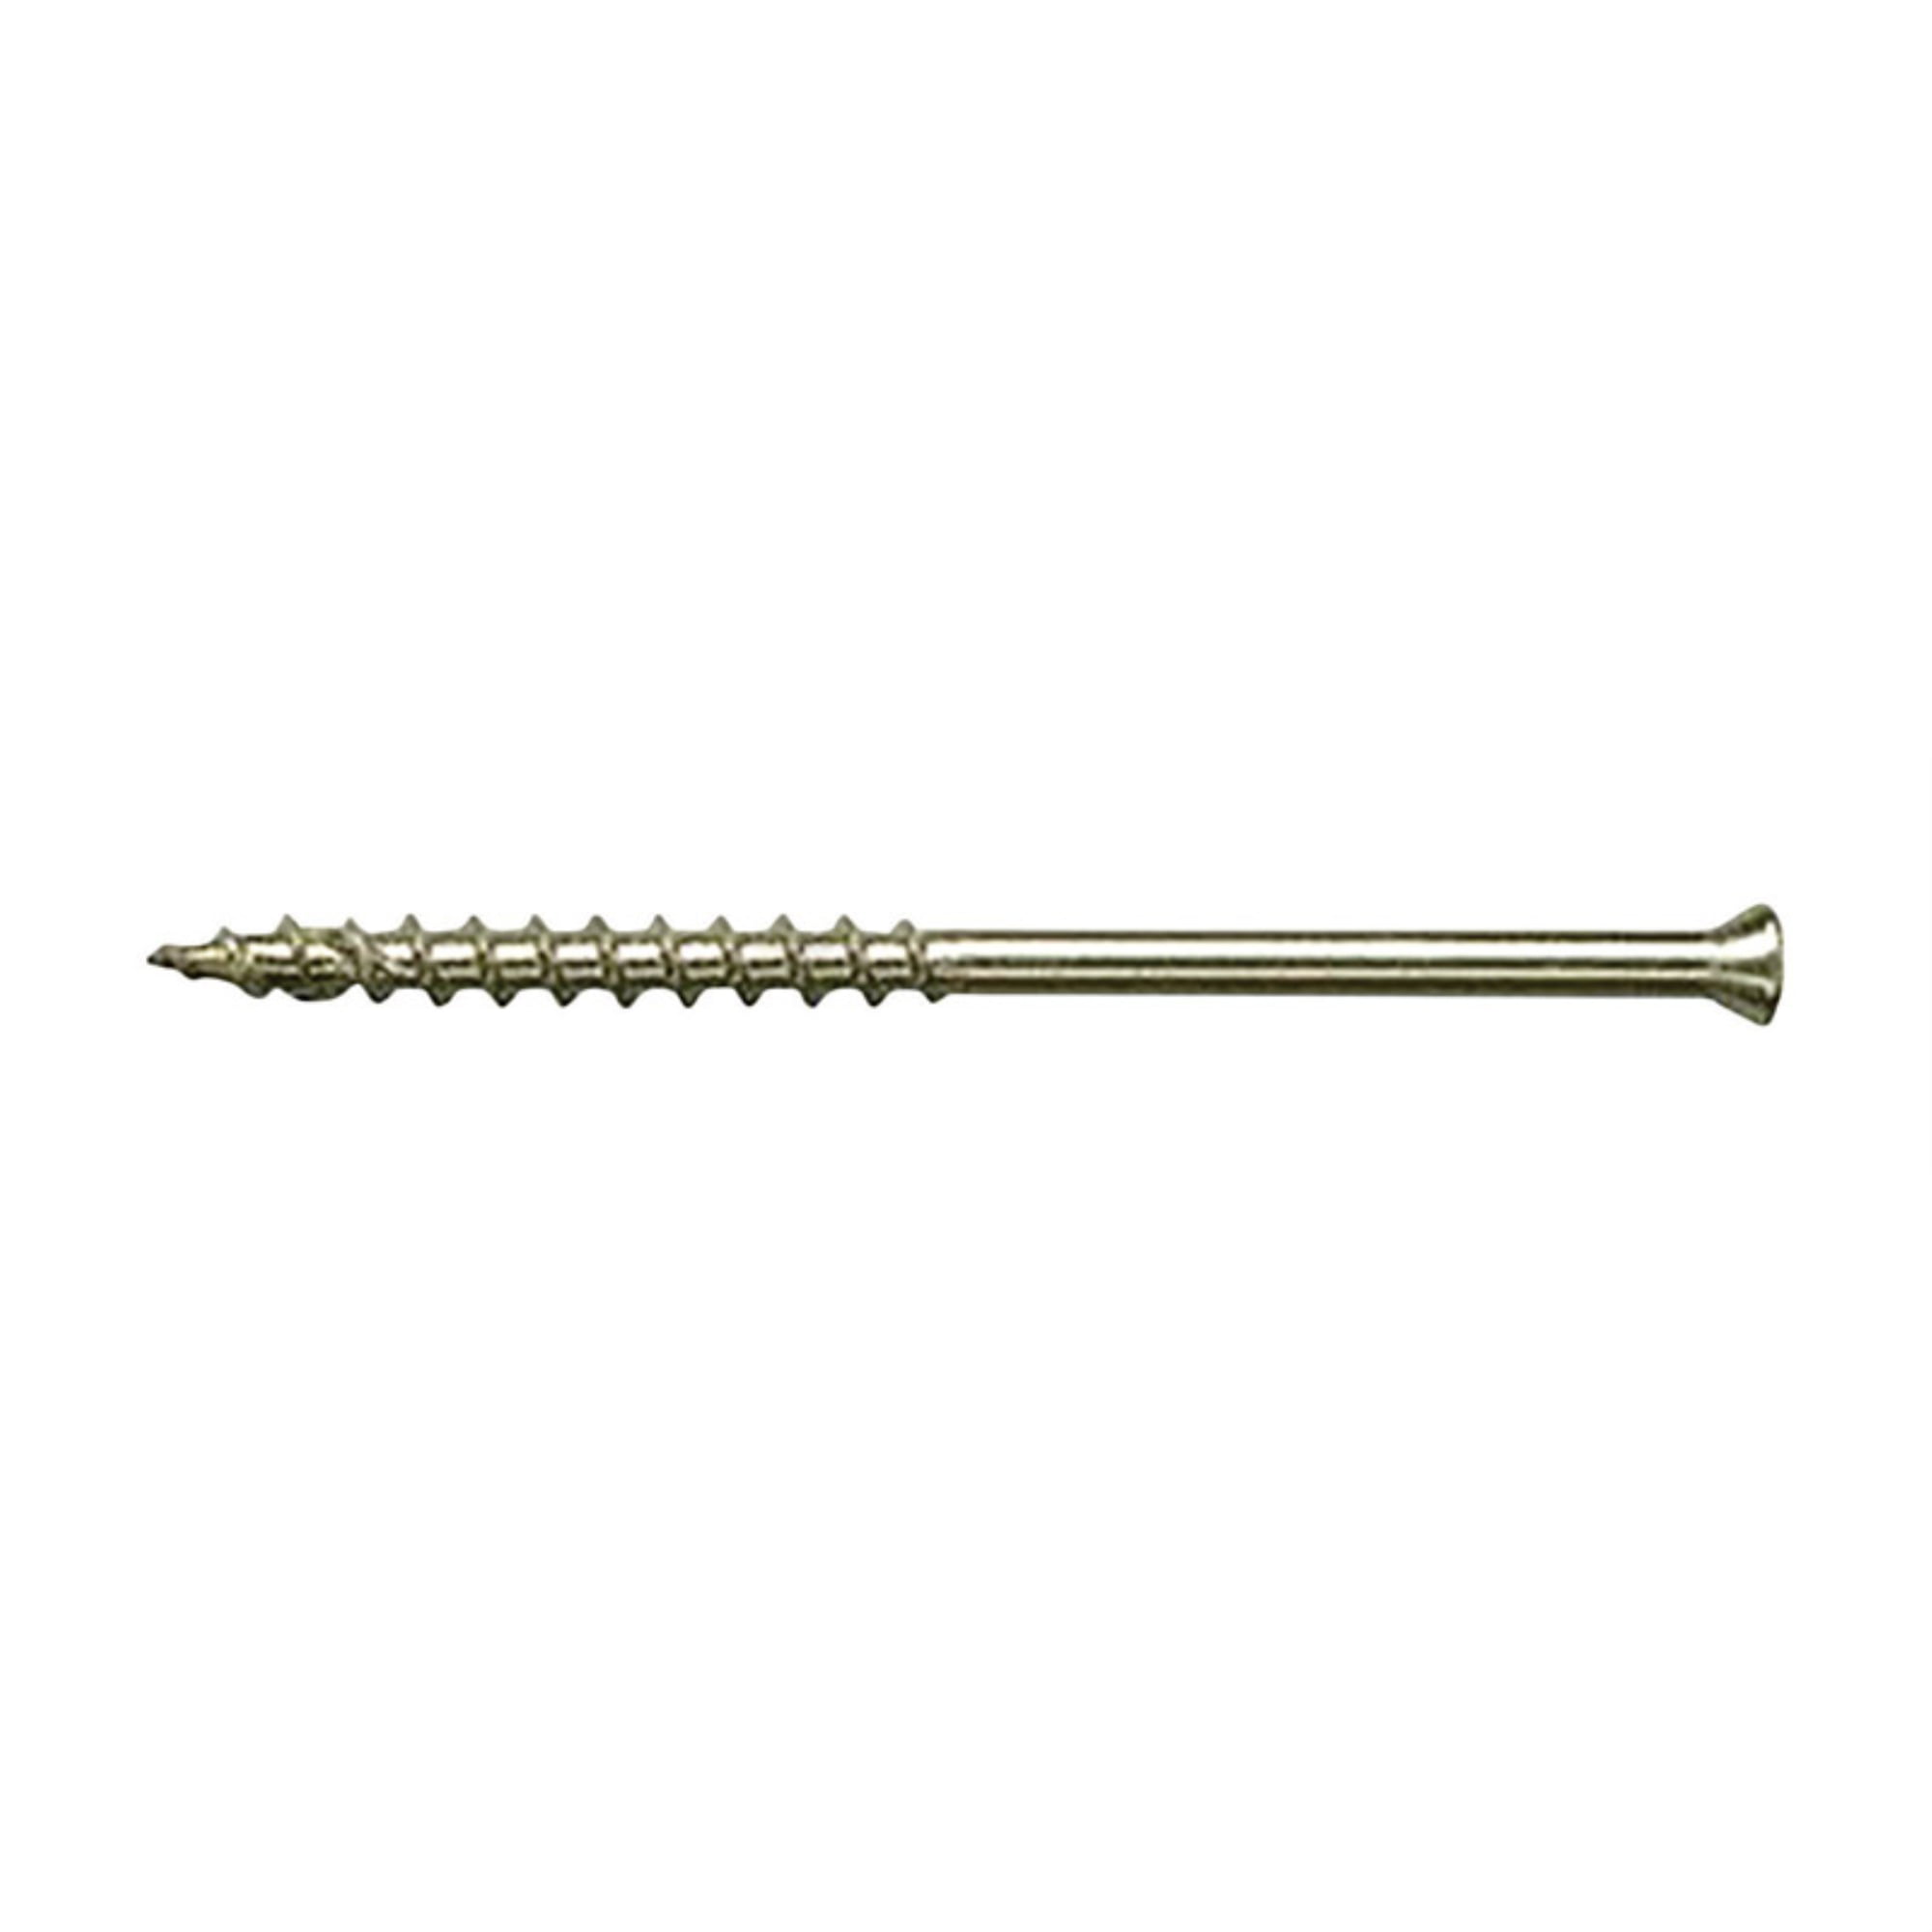 5007668 No. 8 X 3 In. Square Trim Head Stainless Steel Trim Screws, 1 Lbs - Pack Of 12